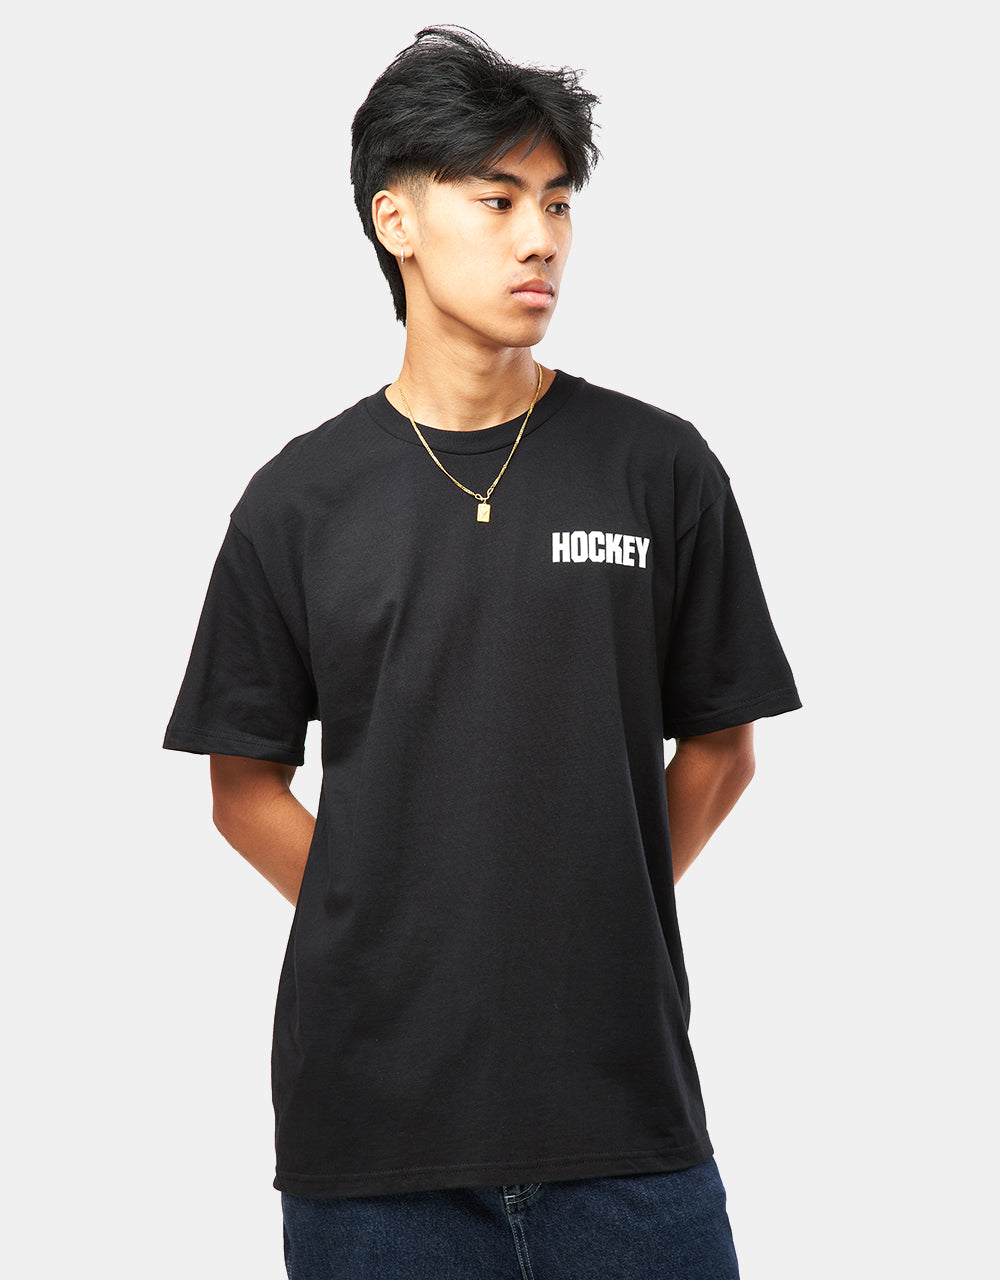 Hockey Luck T-Shirt - Black – Route One